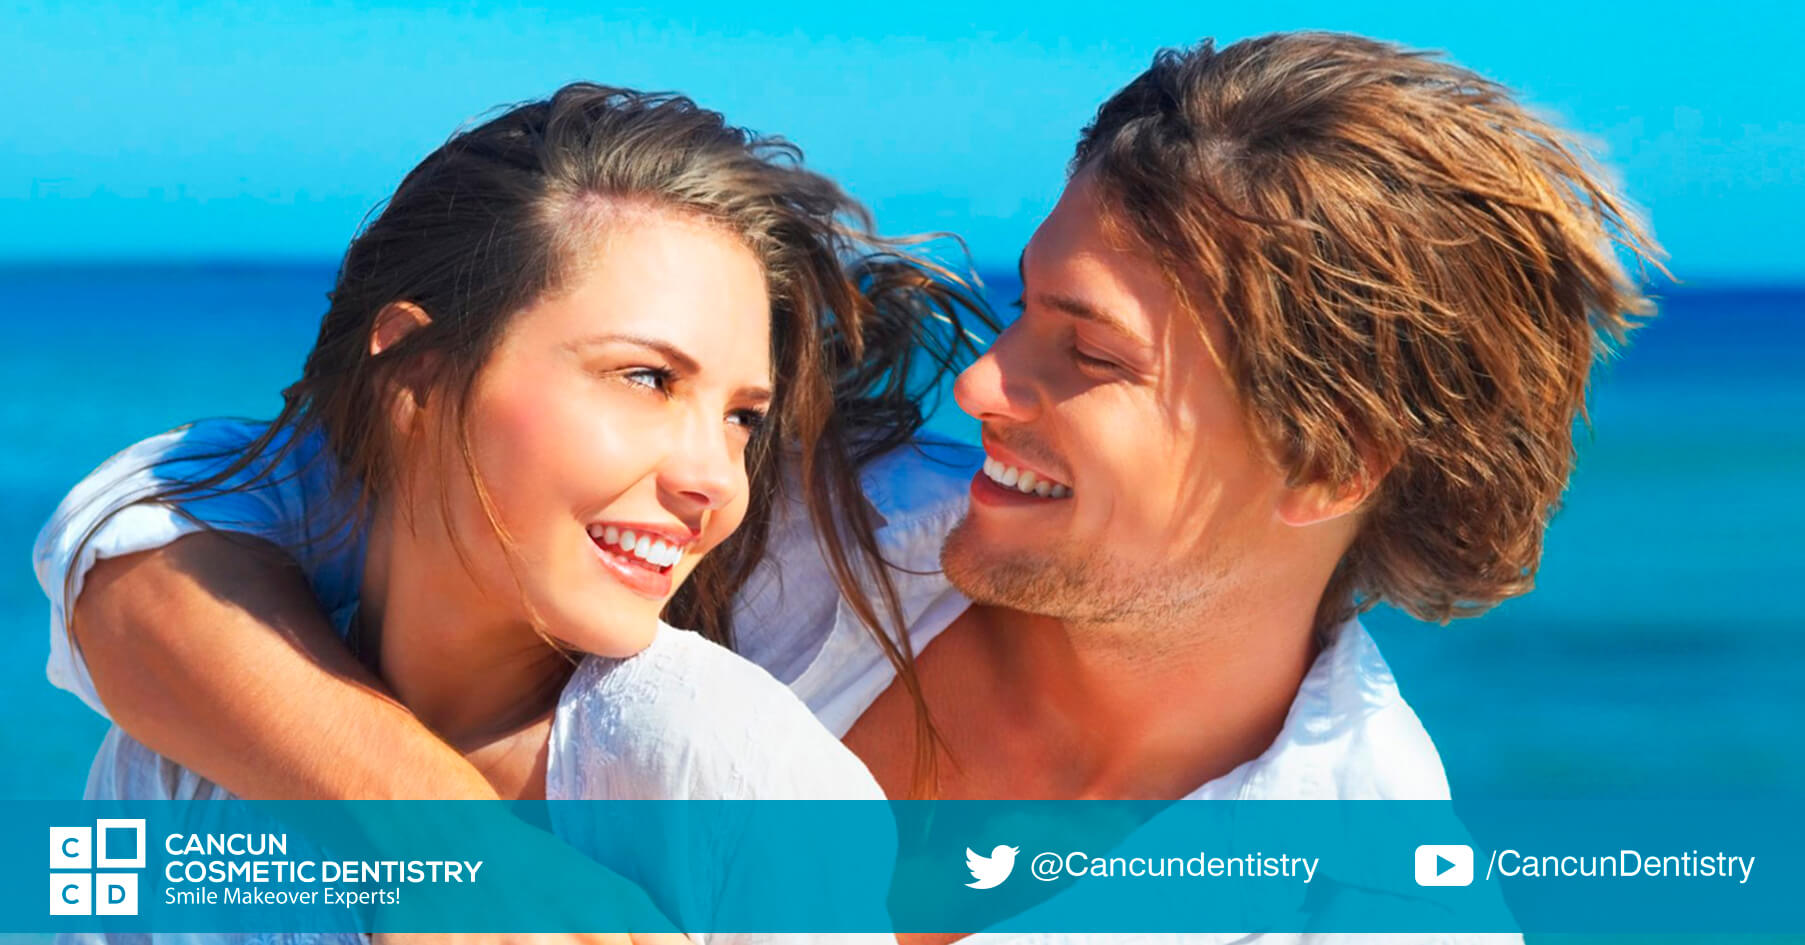 Get the best dental experience in Cancun Cosmetic Dentistry!